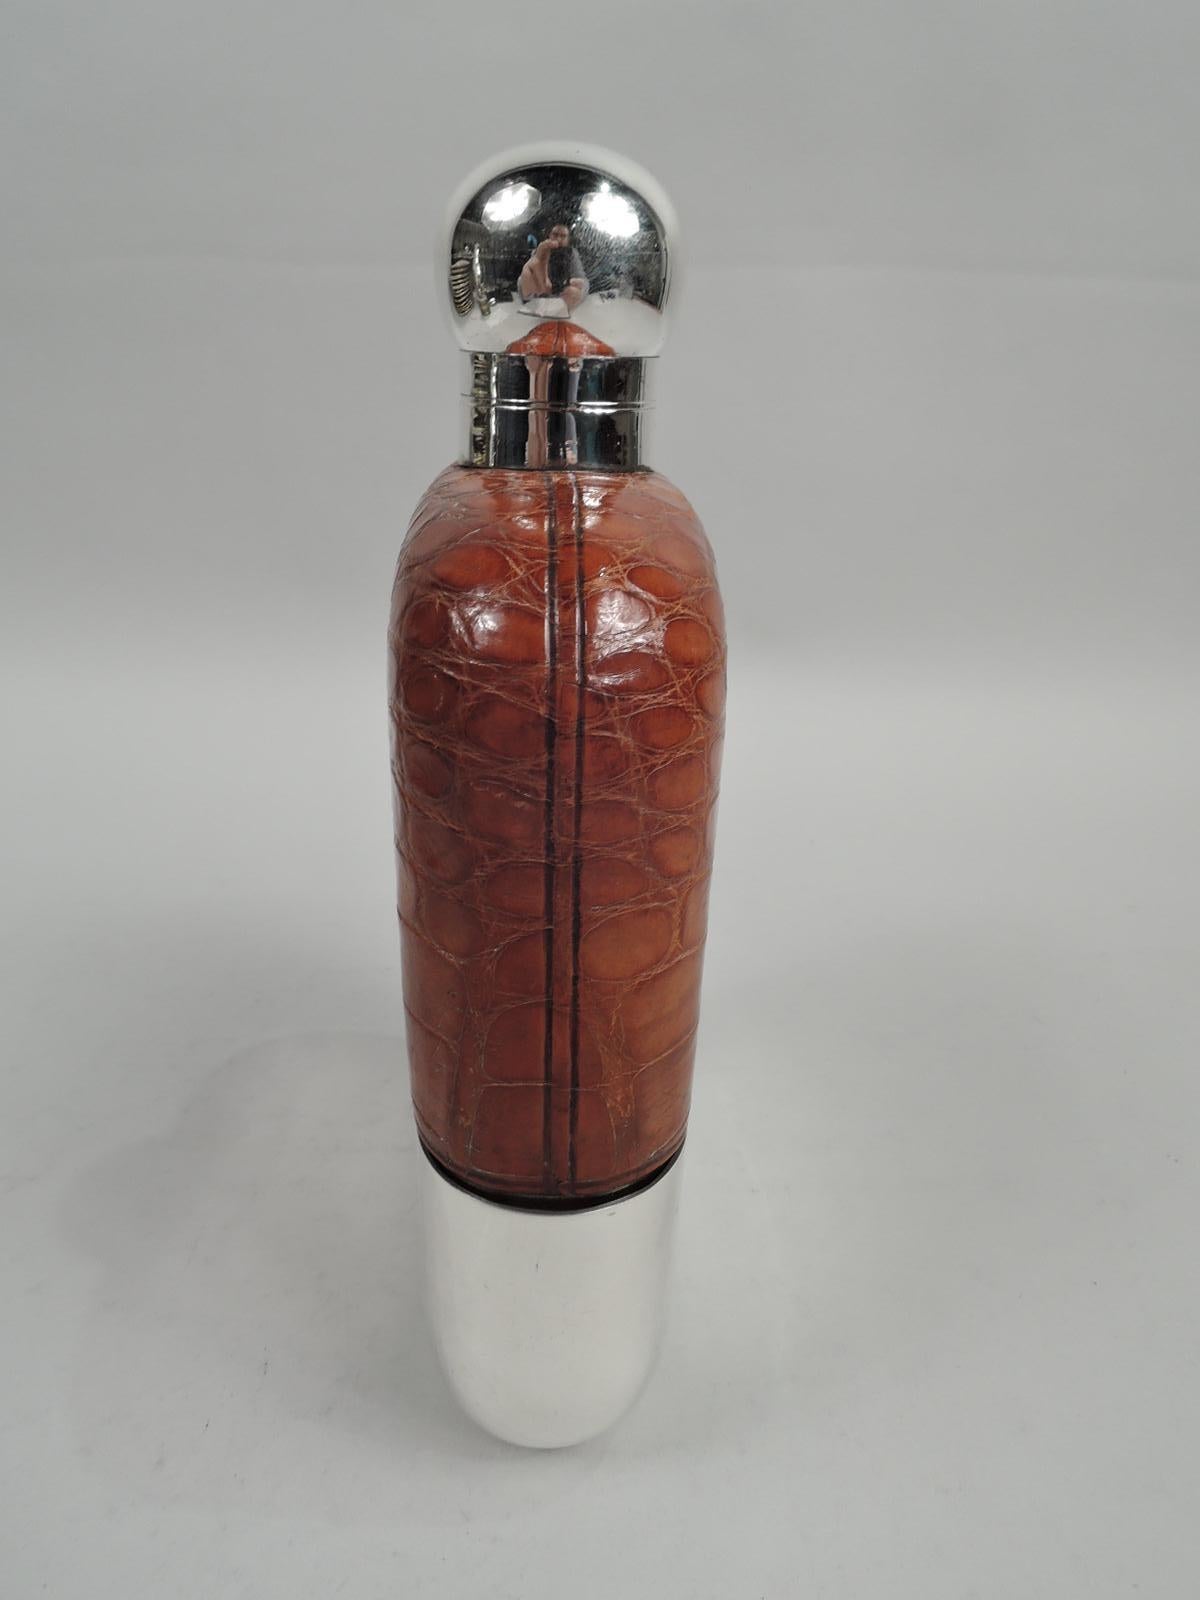 Late Empire safari flask. Made by James Dixon & Sons in Sheffield in 1924. Clear-glass body. Top encased in leather with cutout windows. Bottom has detachable sterling silver cup. Neck sterling silver as is hinged and cork-lined bayonet cover for